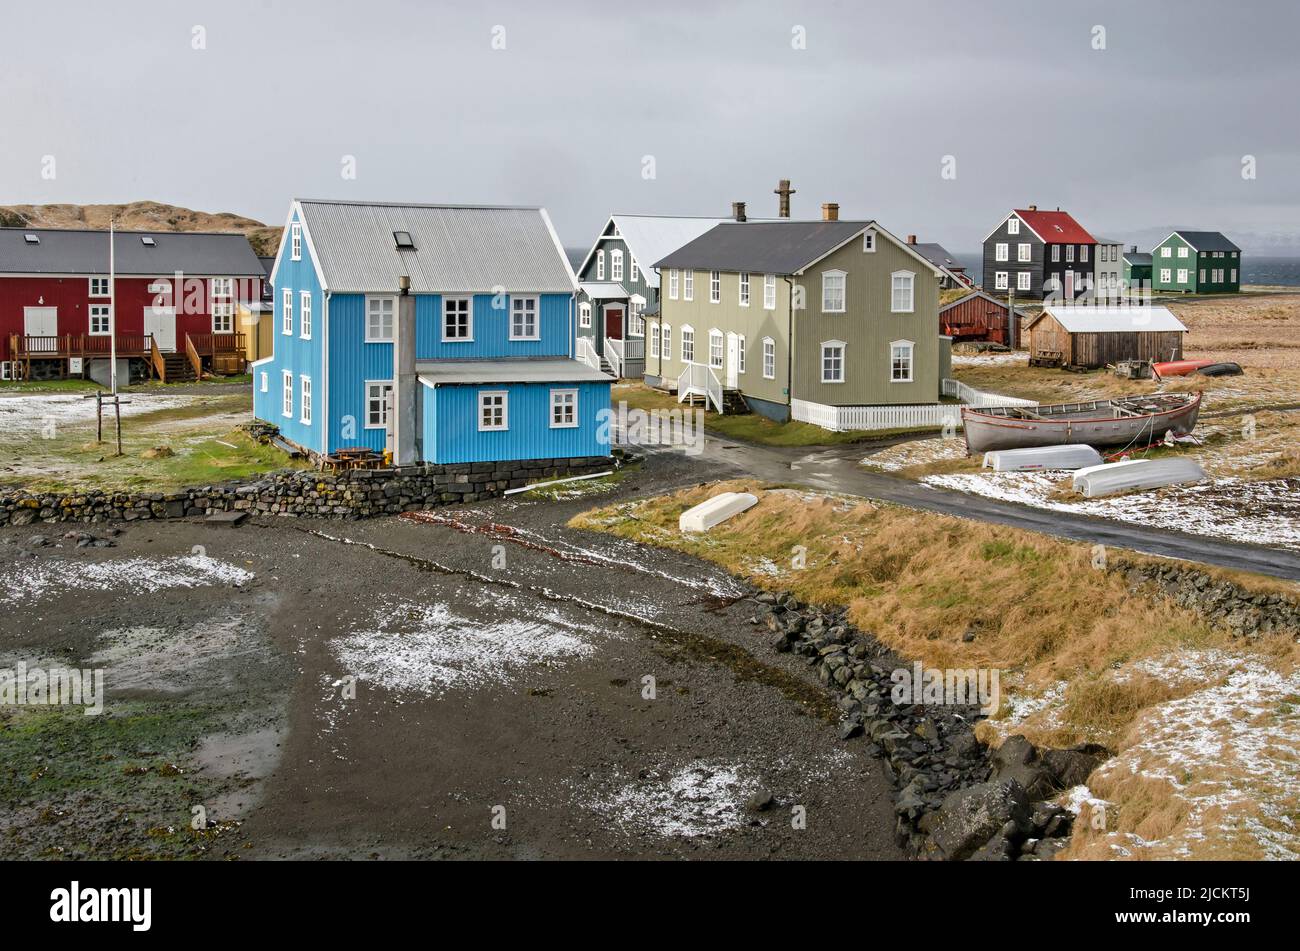 Flatey, Iceland, May 5, 2022: colorful houses of wood and corrugated metal in the island's village by the bay Stock Photo